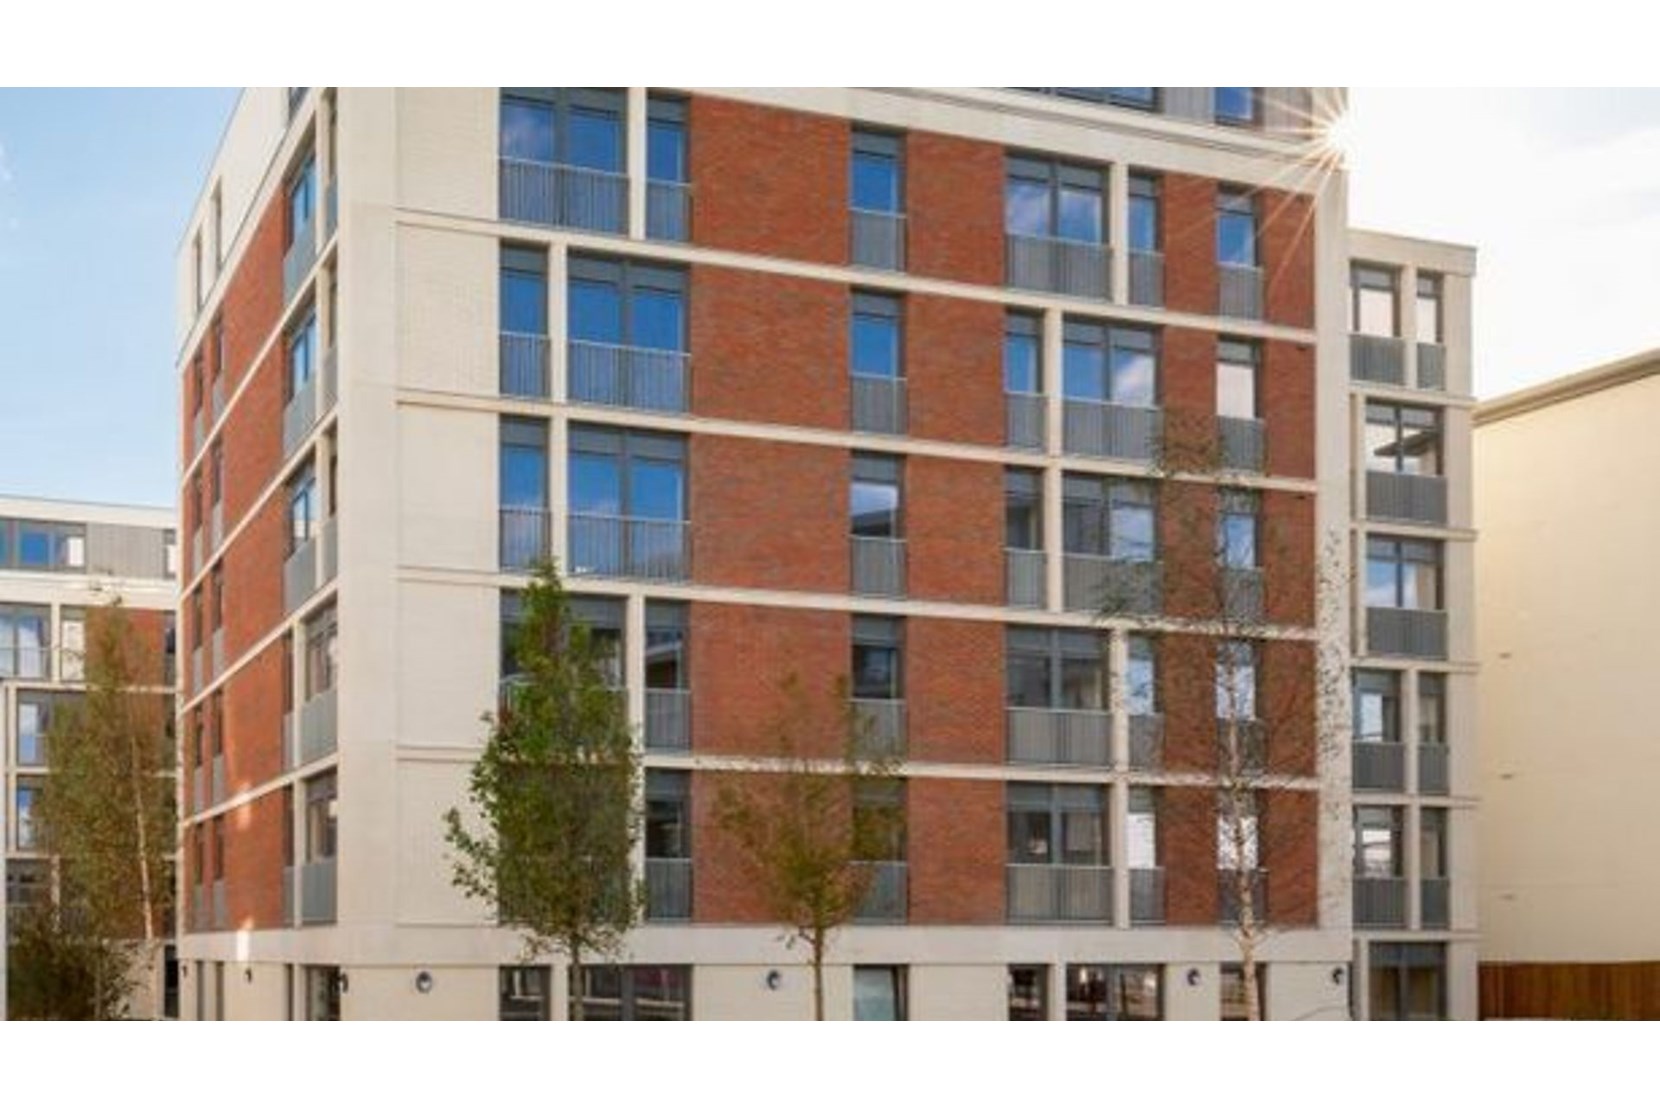 Apartments to Rent by JLL at Lochrin Quay, Edinburgh, EH3, development panoramic